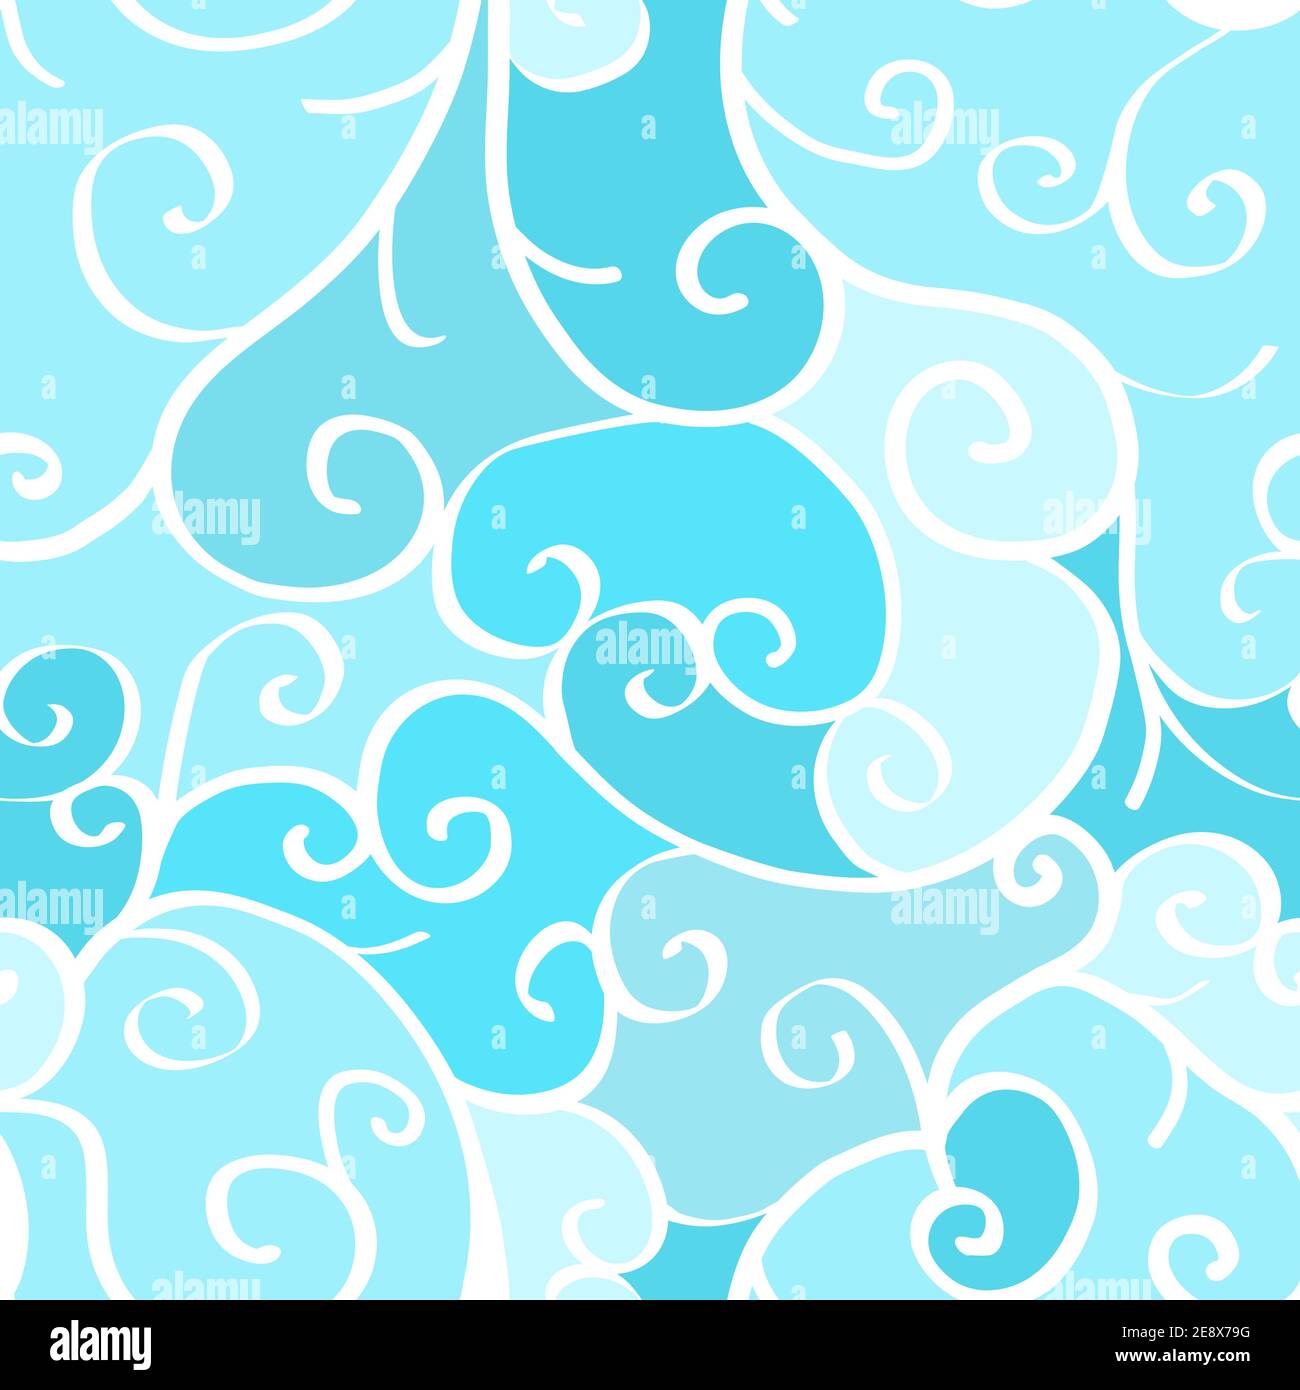 Blue seamless pattern with swirls Stock Vector